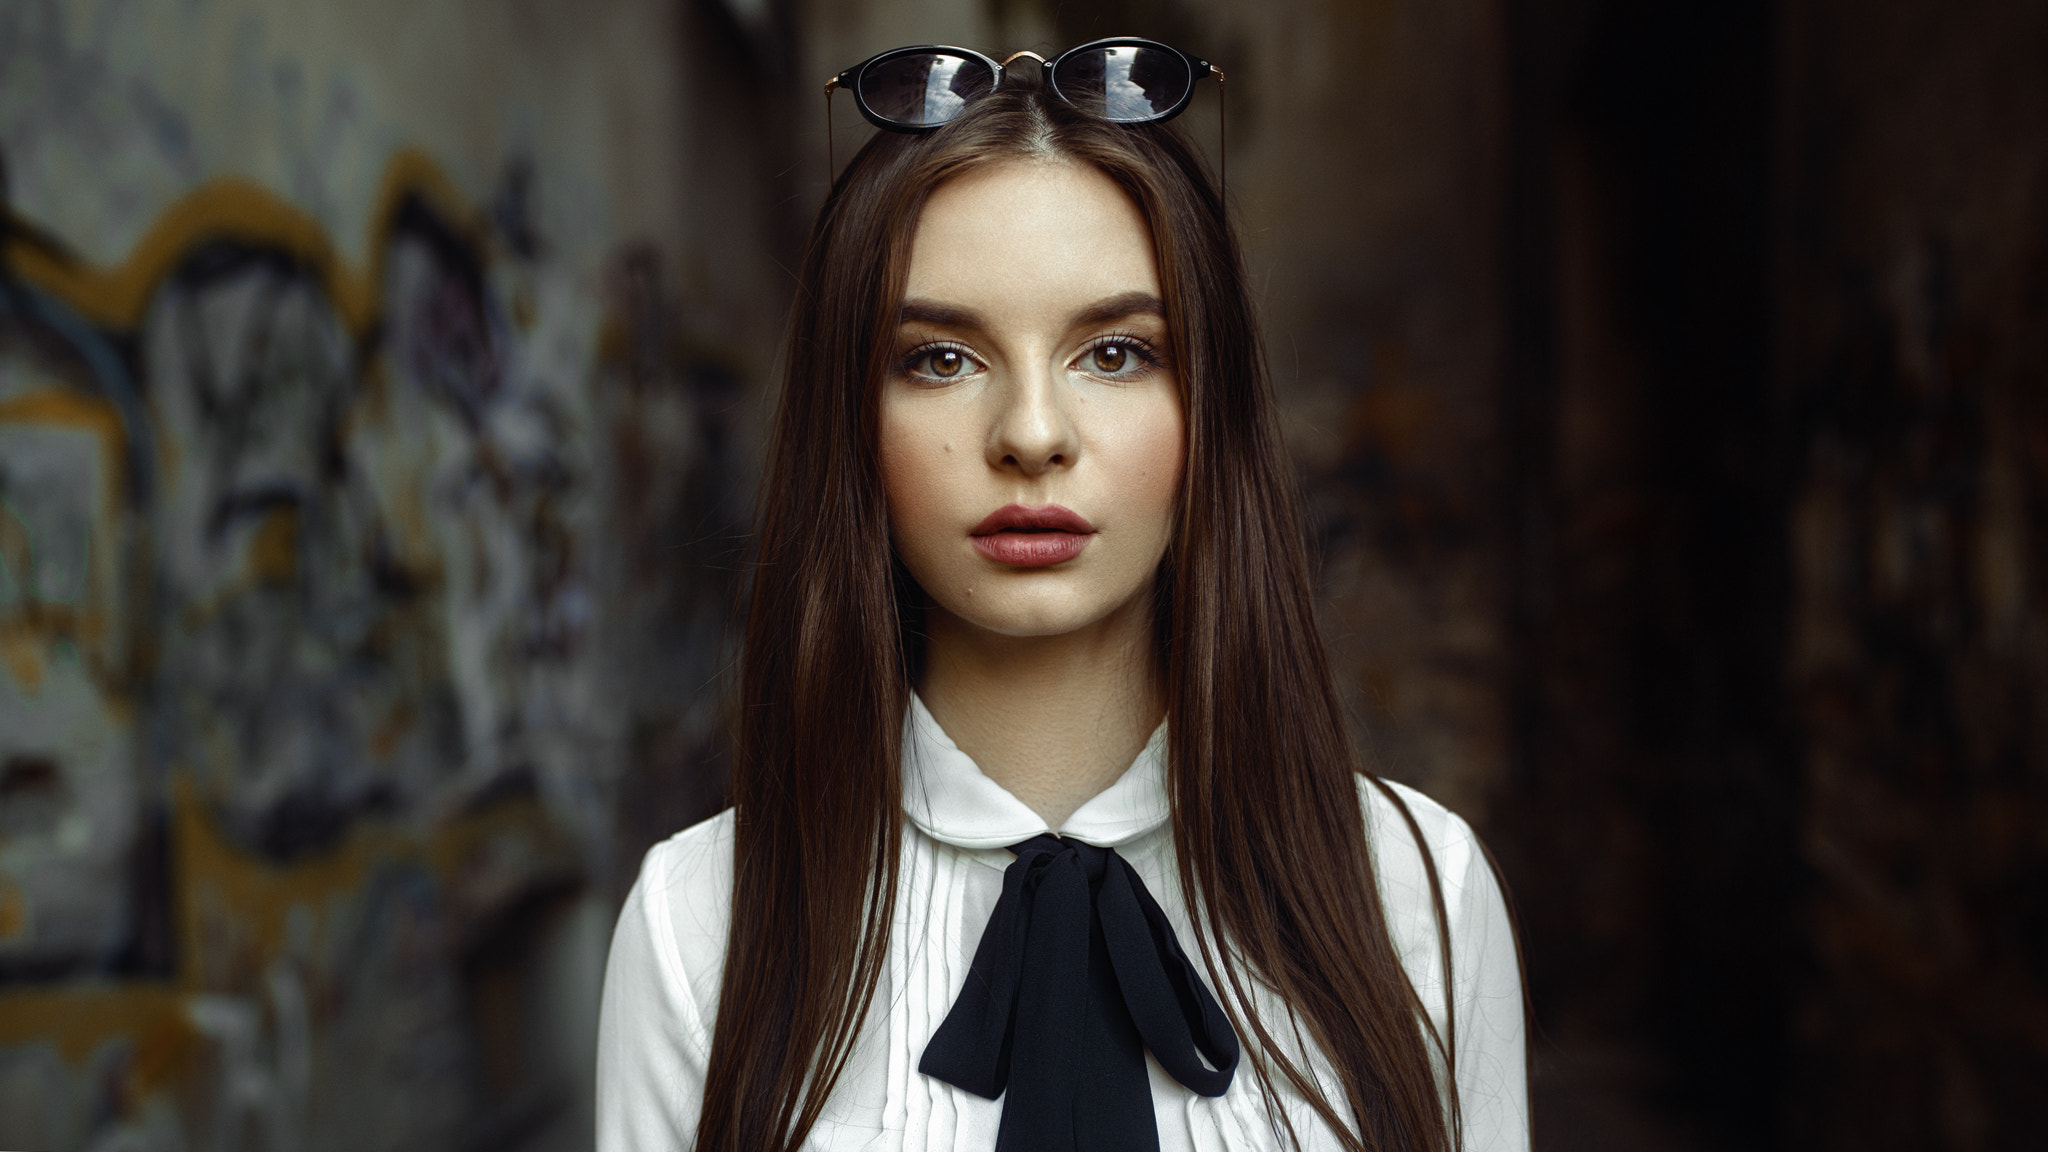 People 2048x1152 women Damian Piórko portrait face sunglasses red lipstick long hair straight hair brown eyes Polish women looking at viewer women with shades juicy lips Polish Polish model frontal view Victoria Cwynar model